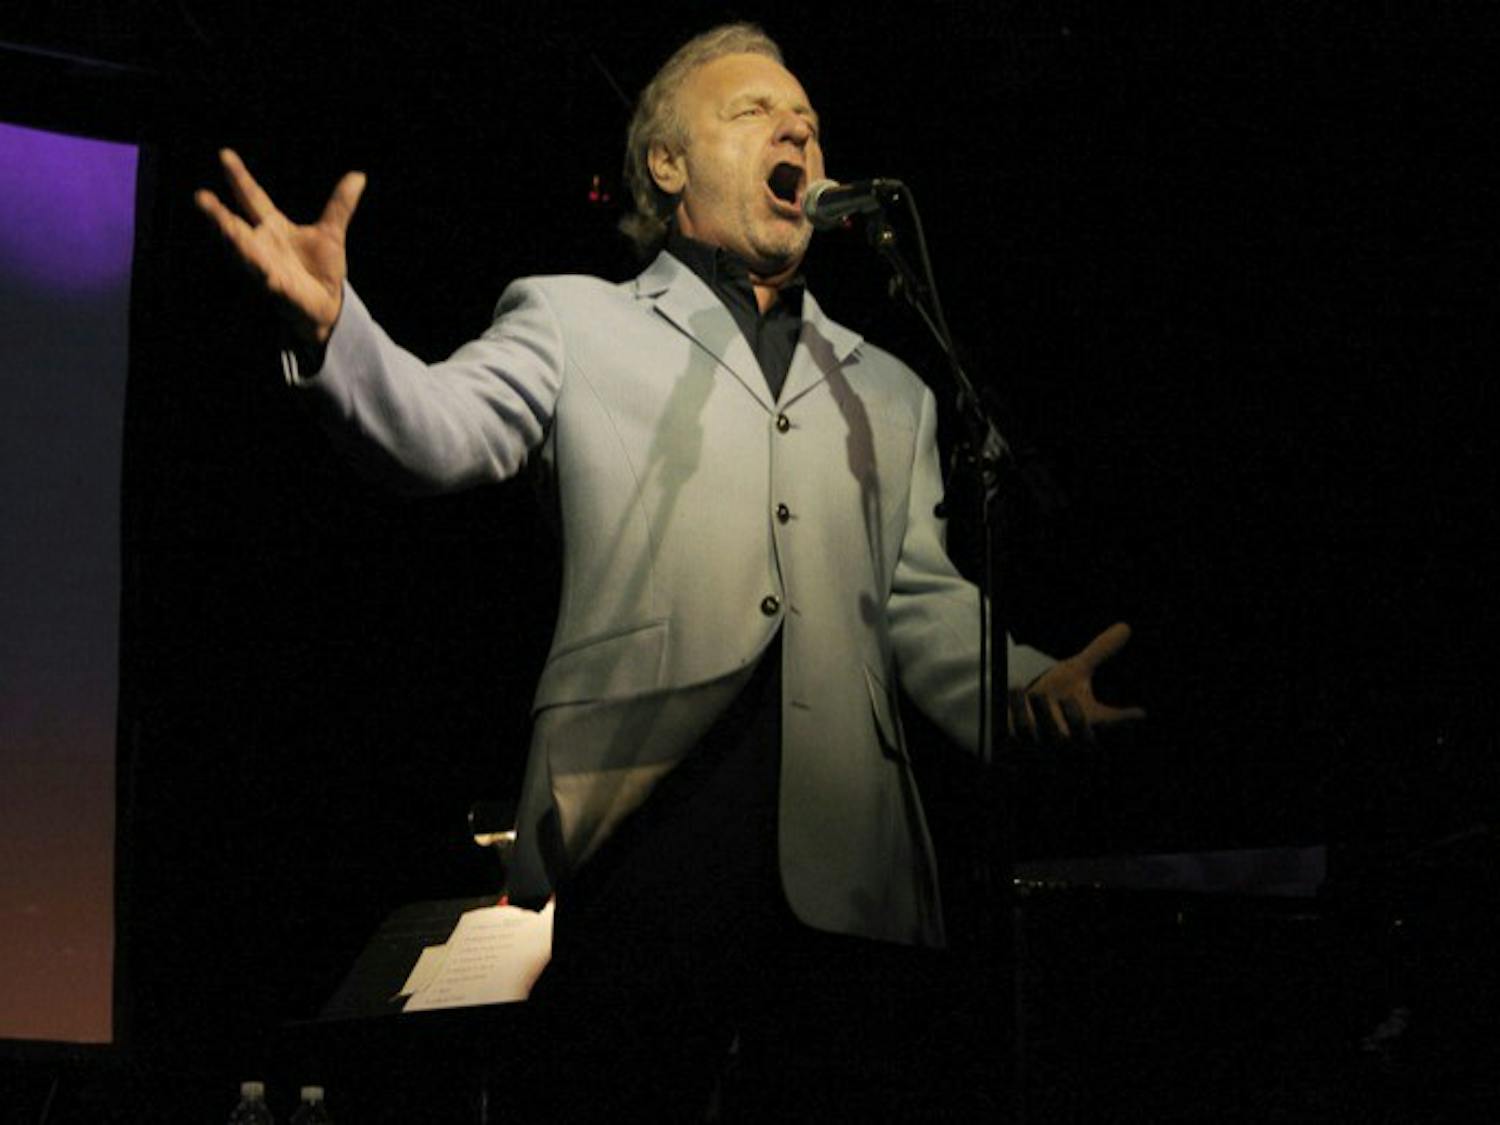 Lauded Broadway performer Colm Wilkinson, known for his performances in “The Phantom of the Opera” and “Les Misérables,” gave a charming concert on Tuesday, Nov. 10 at the Center for the Arts. Among his famous theatrical songs, Wilkinson even performed songs from The Beatles catalogue.